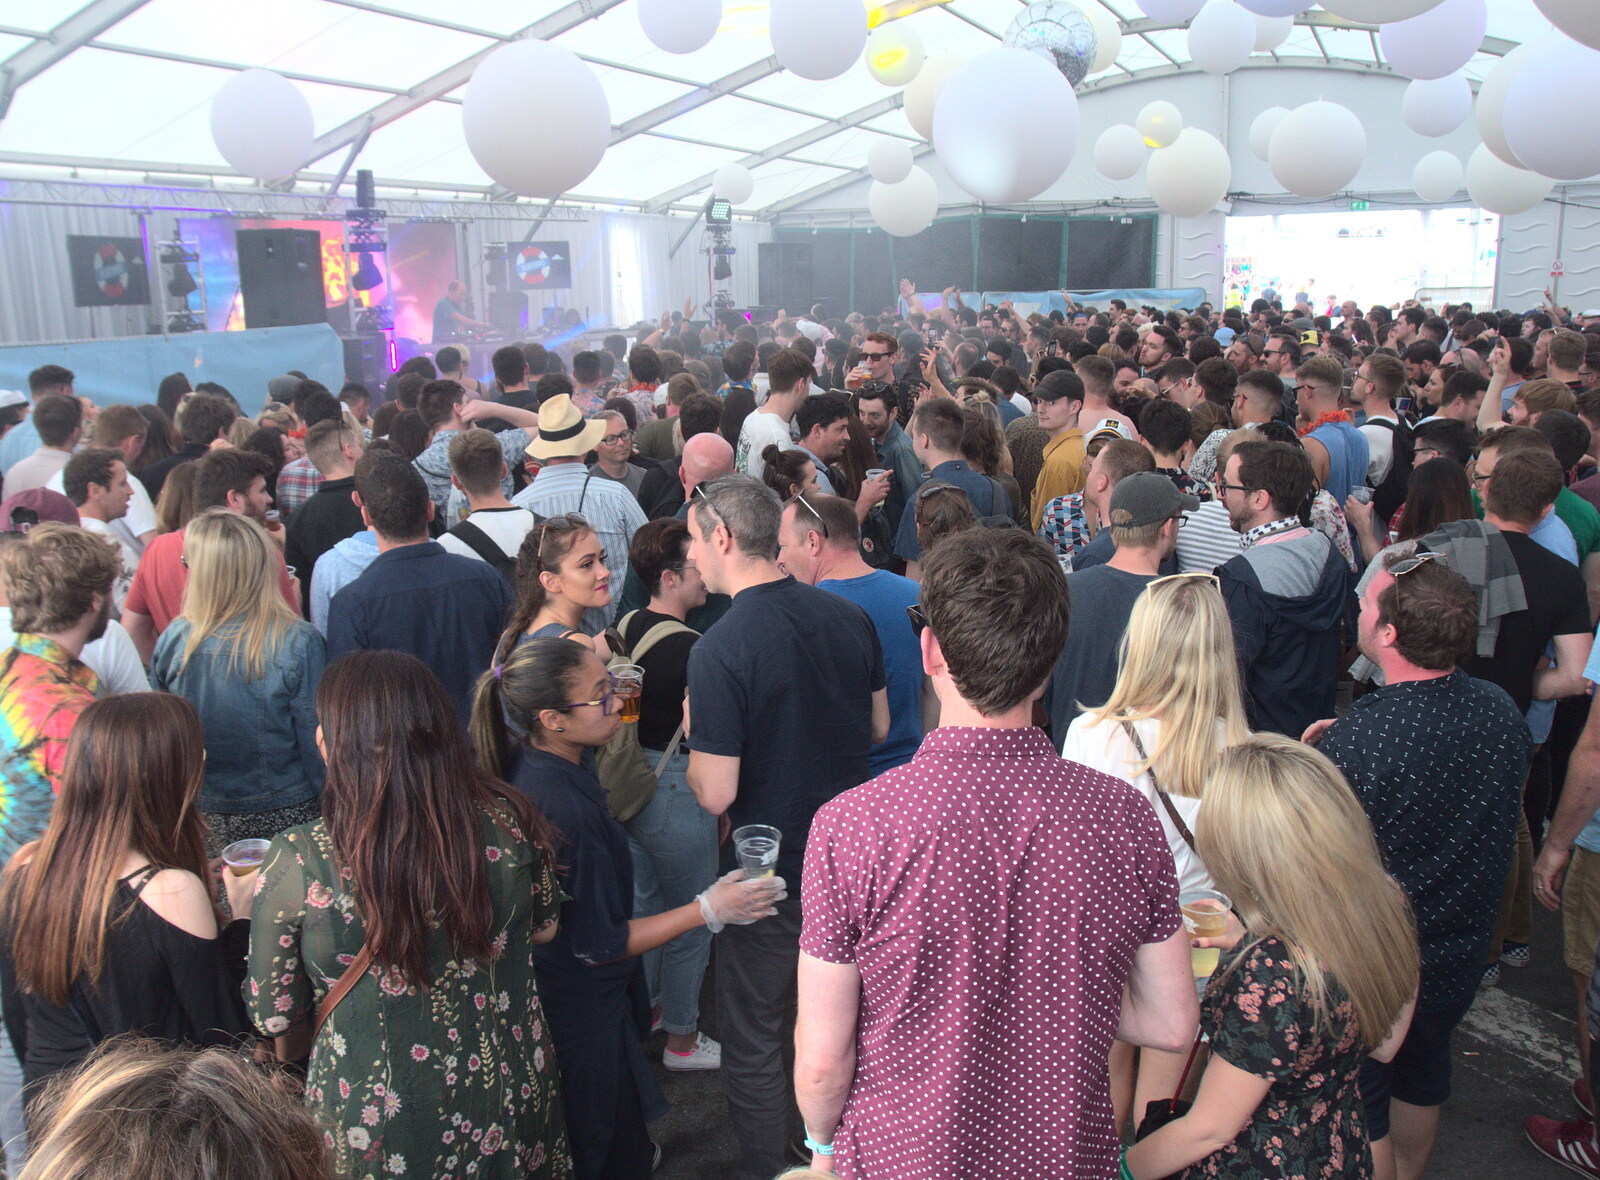 The dance tent is packed from Beatyard Festival, Dún Laoghaire, County Dublin, Ireland - 5th August 2018